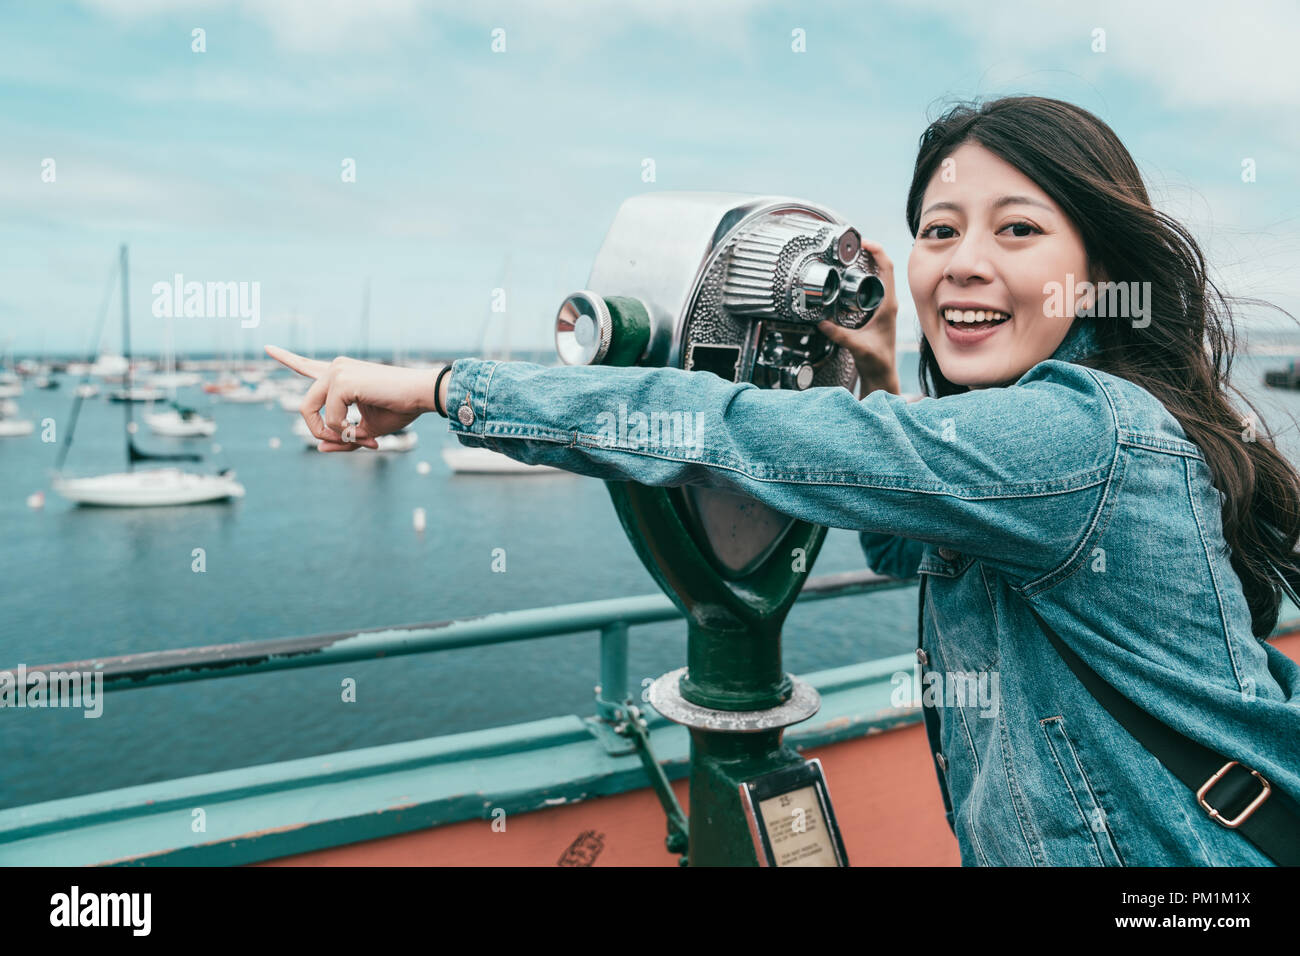 happy beautiful girl pointing at sea while looking through a telescope for finding interesting stuff. Stock Photo